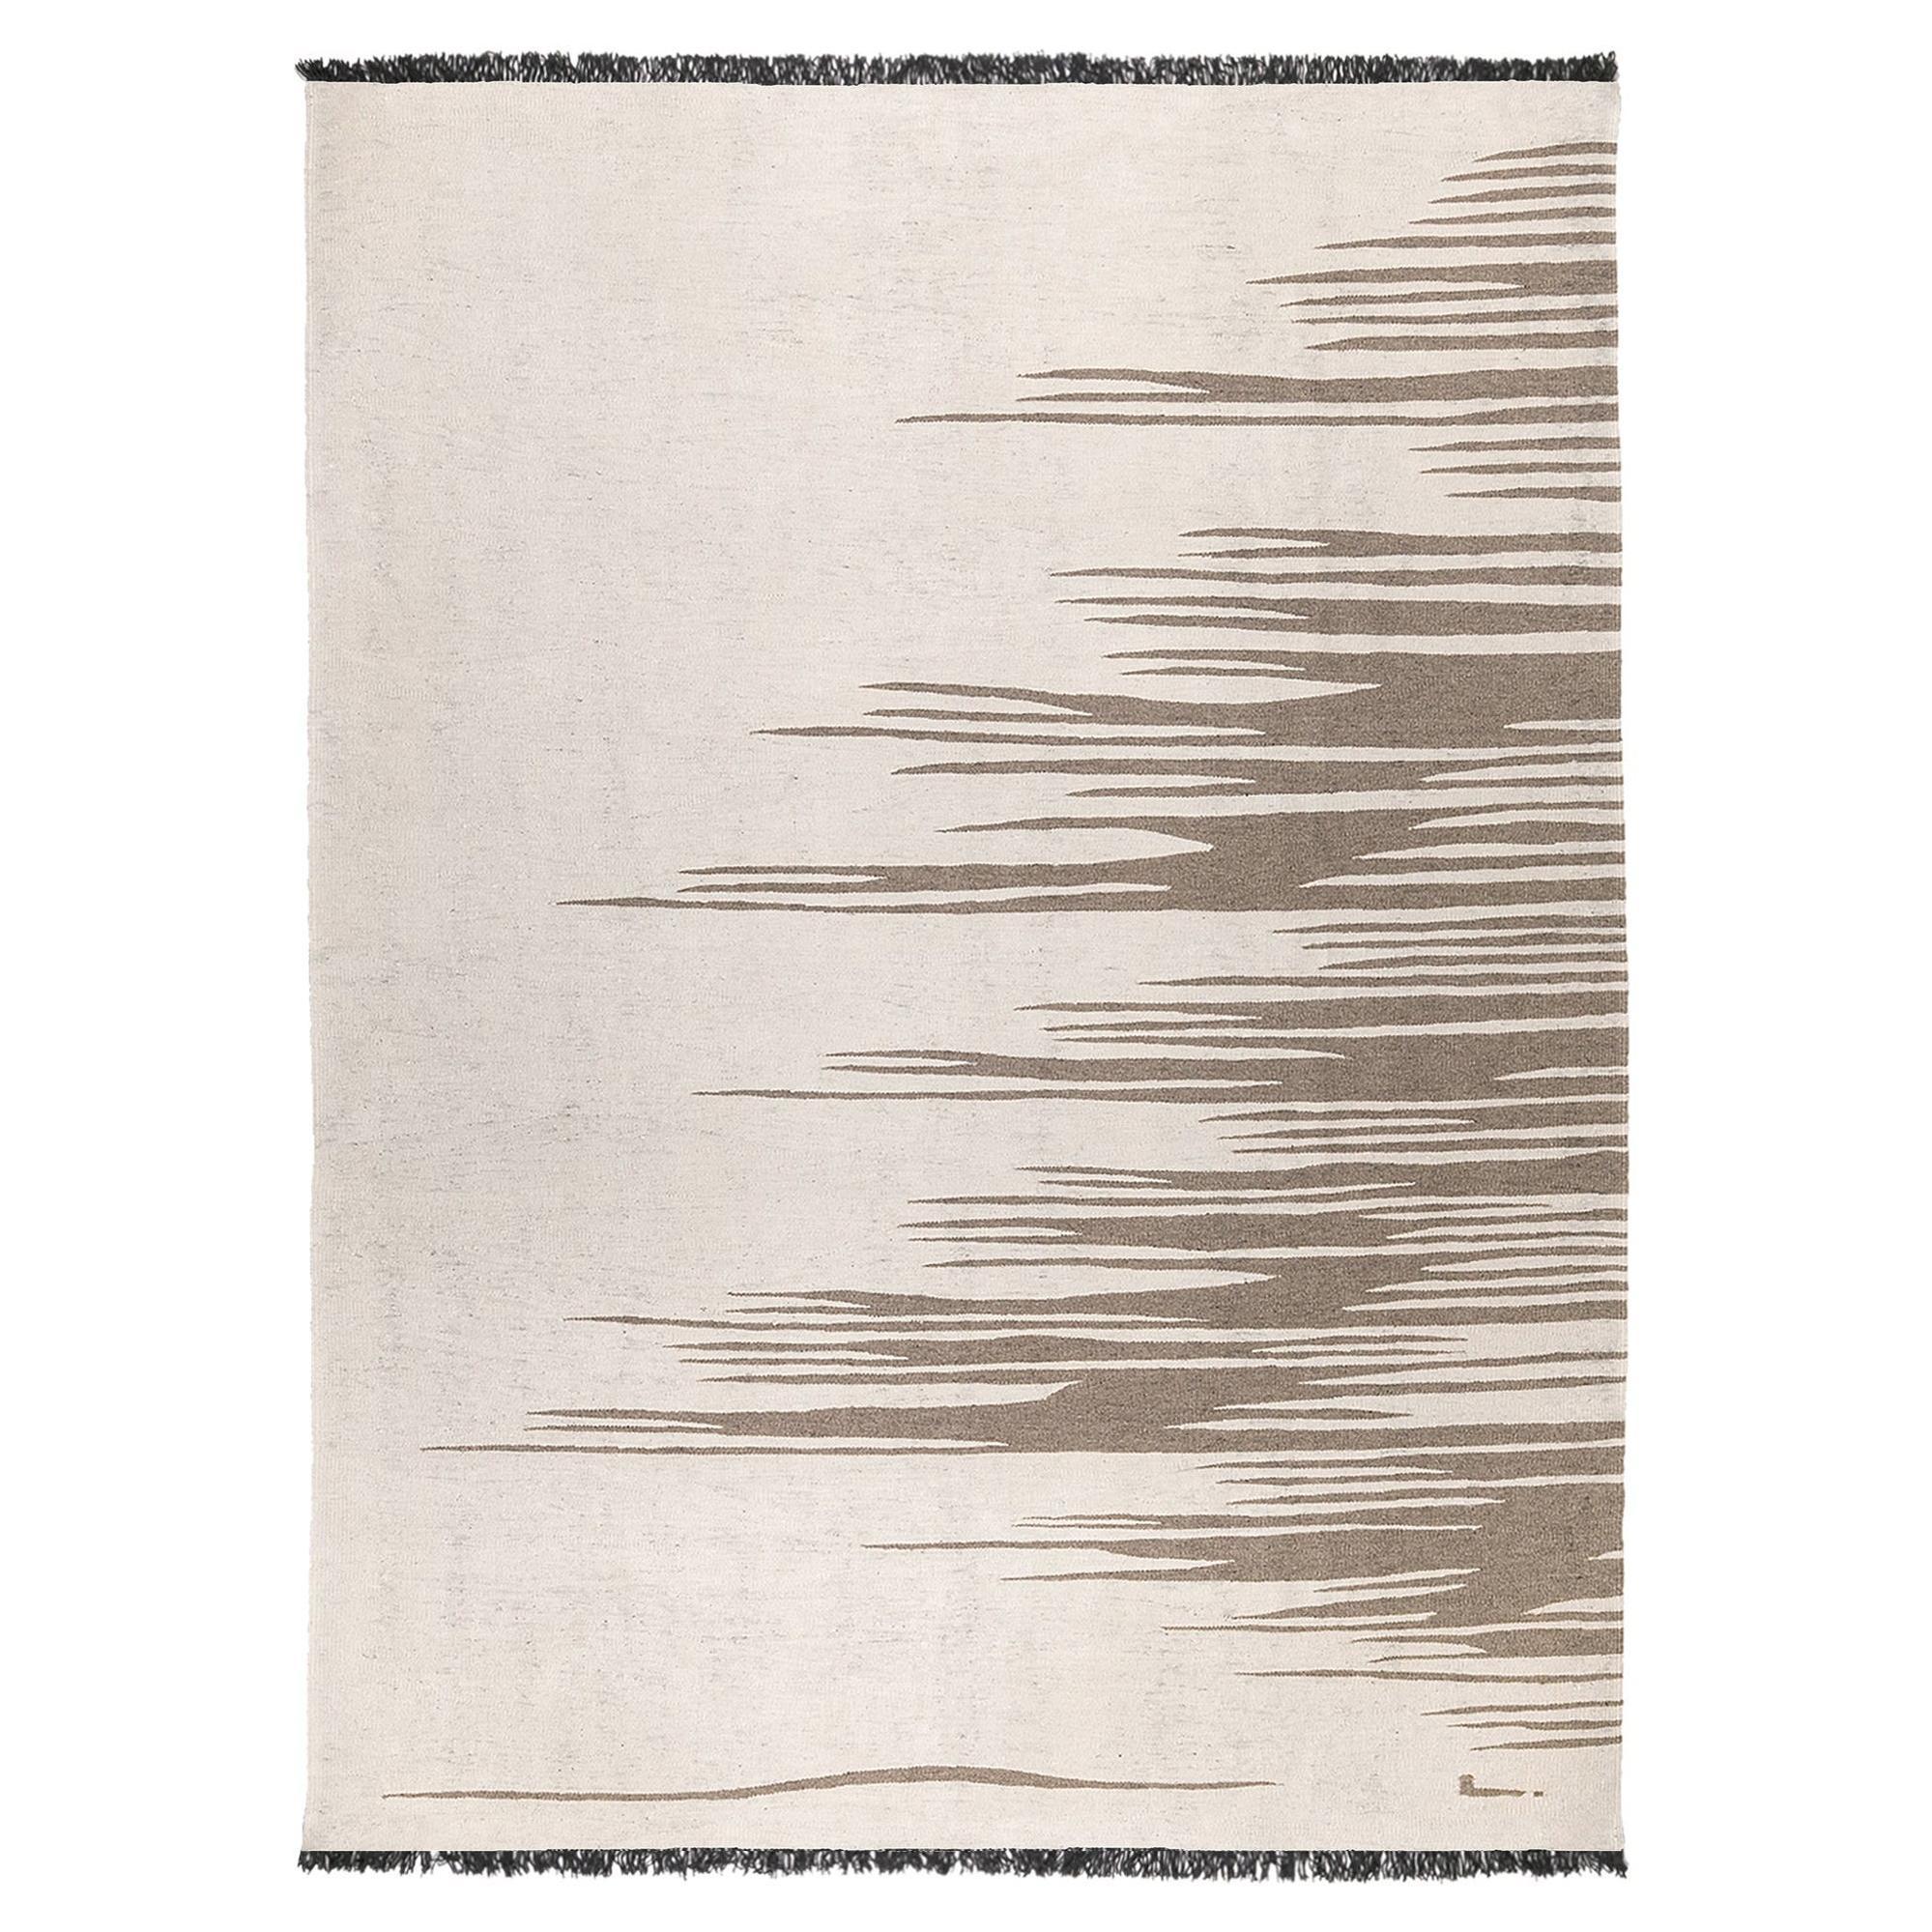 Ege No 3 Kilim Rug Wool Handwoven Dune White - Earthy Gray Made to Order For Sale